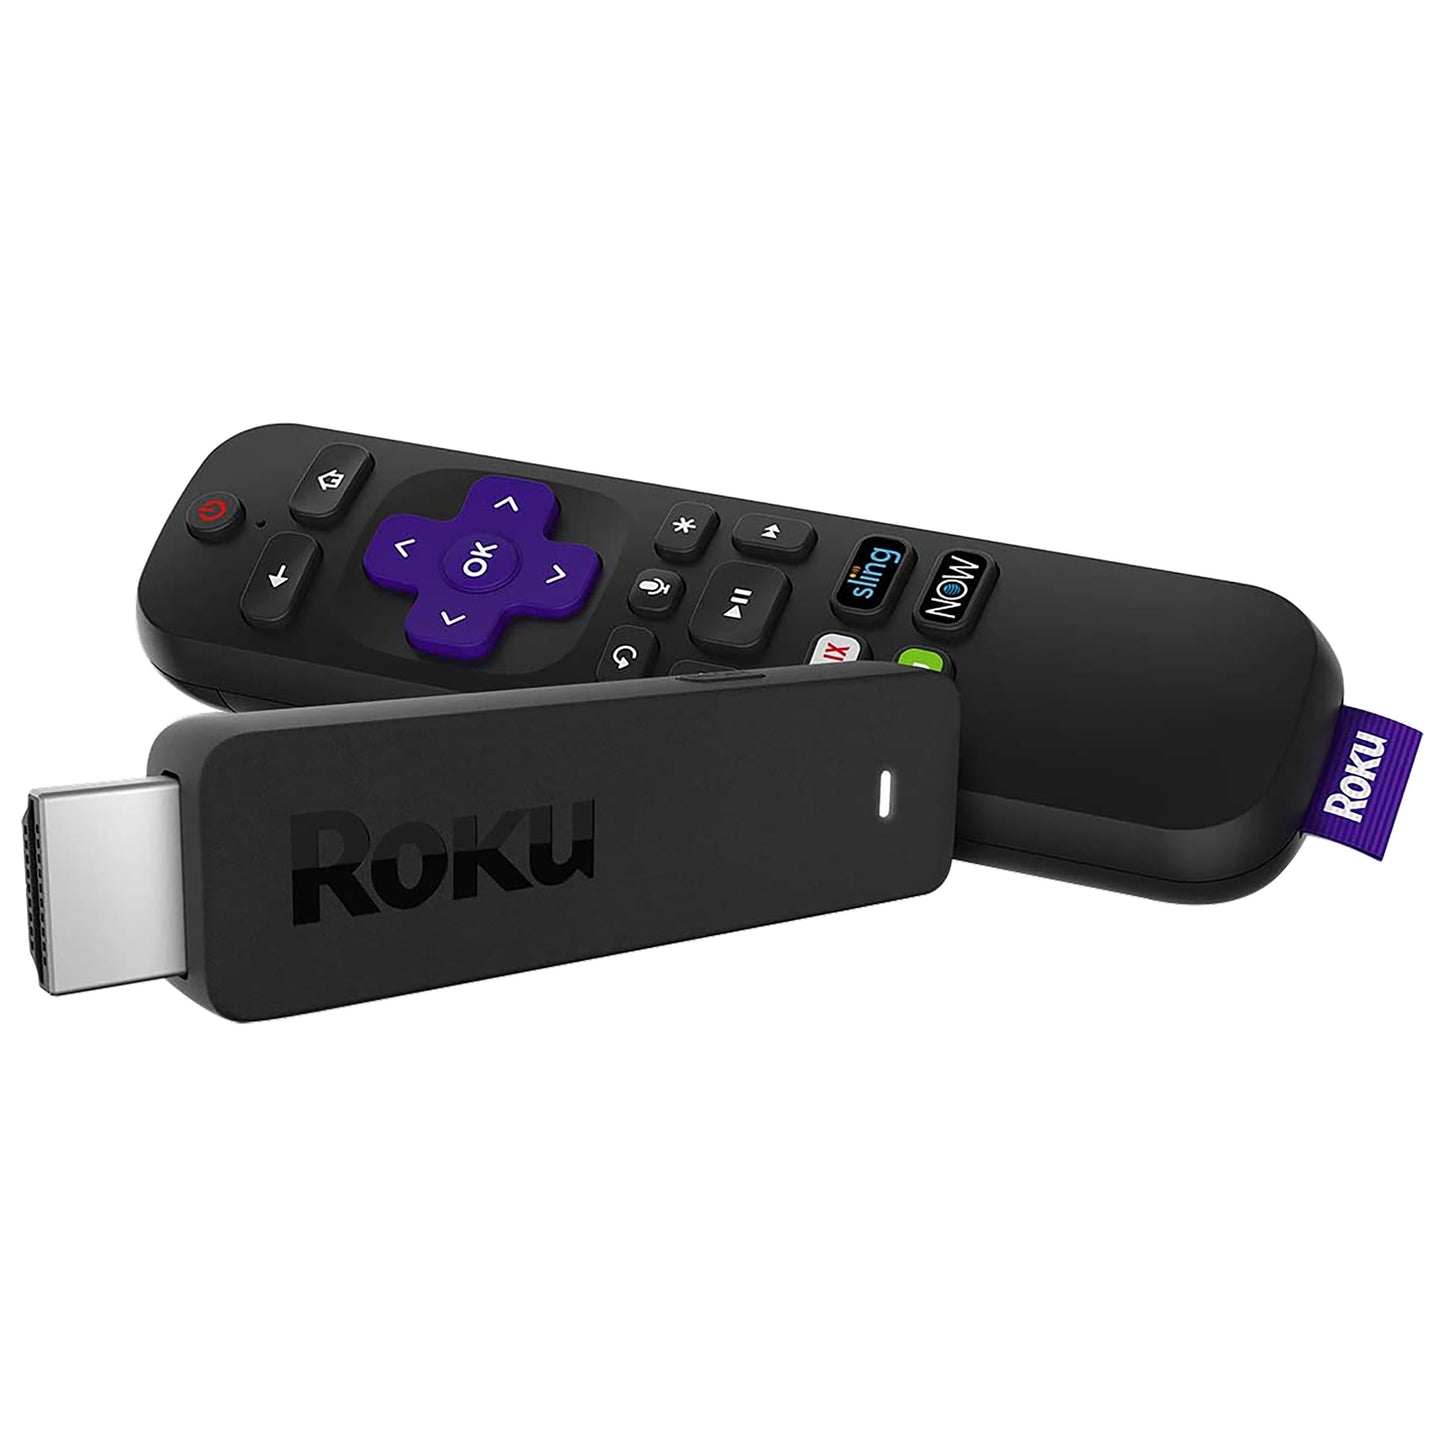 RCA RPJ138 1080p Full HD Home Theater Projector with Roku® Streaming Stick®